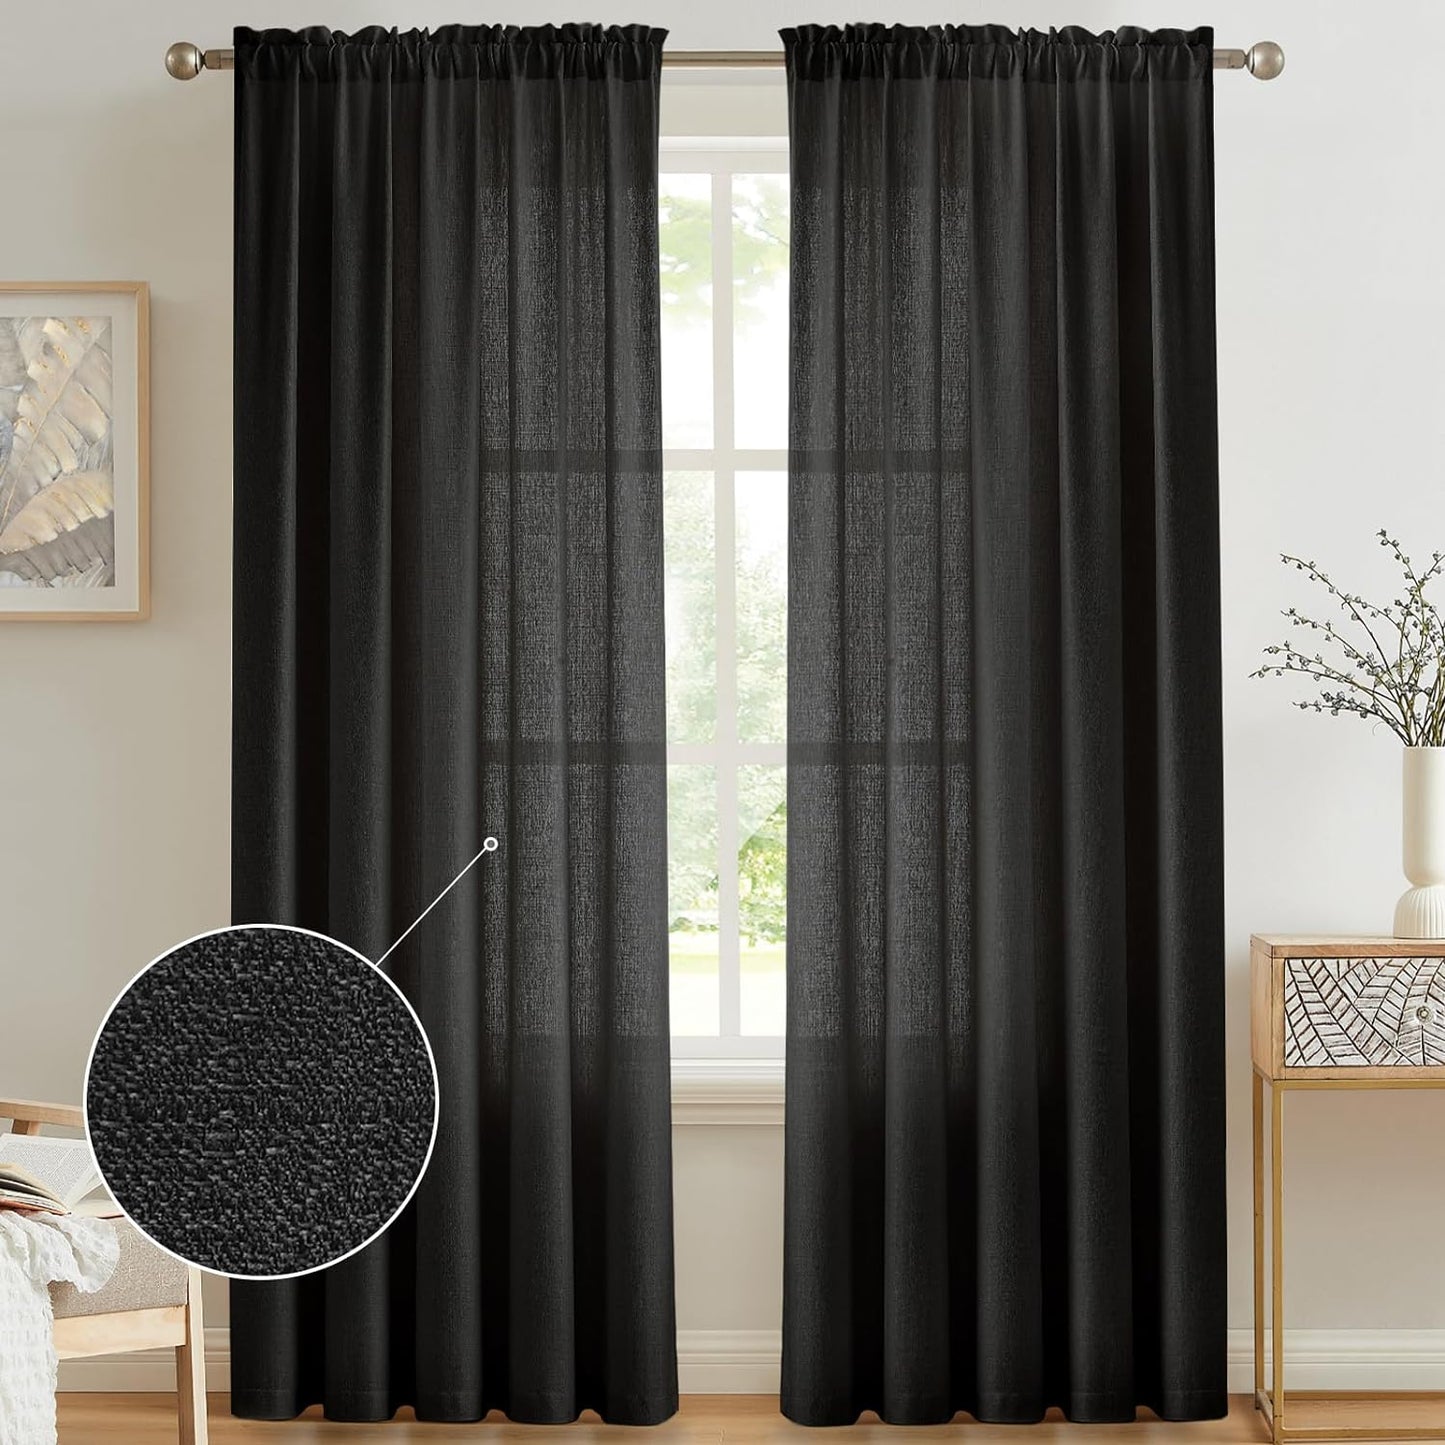 Anpark White Semi Sheer Curtains Linen Rod Pocket Curtains Tiebacks Included Semi Sheers, Privacy & Serenity for Bedroom, Soft Light for Relaxation - 52" W X 84" L, 2 Panels  Anpark Black 52X96 Inch 